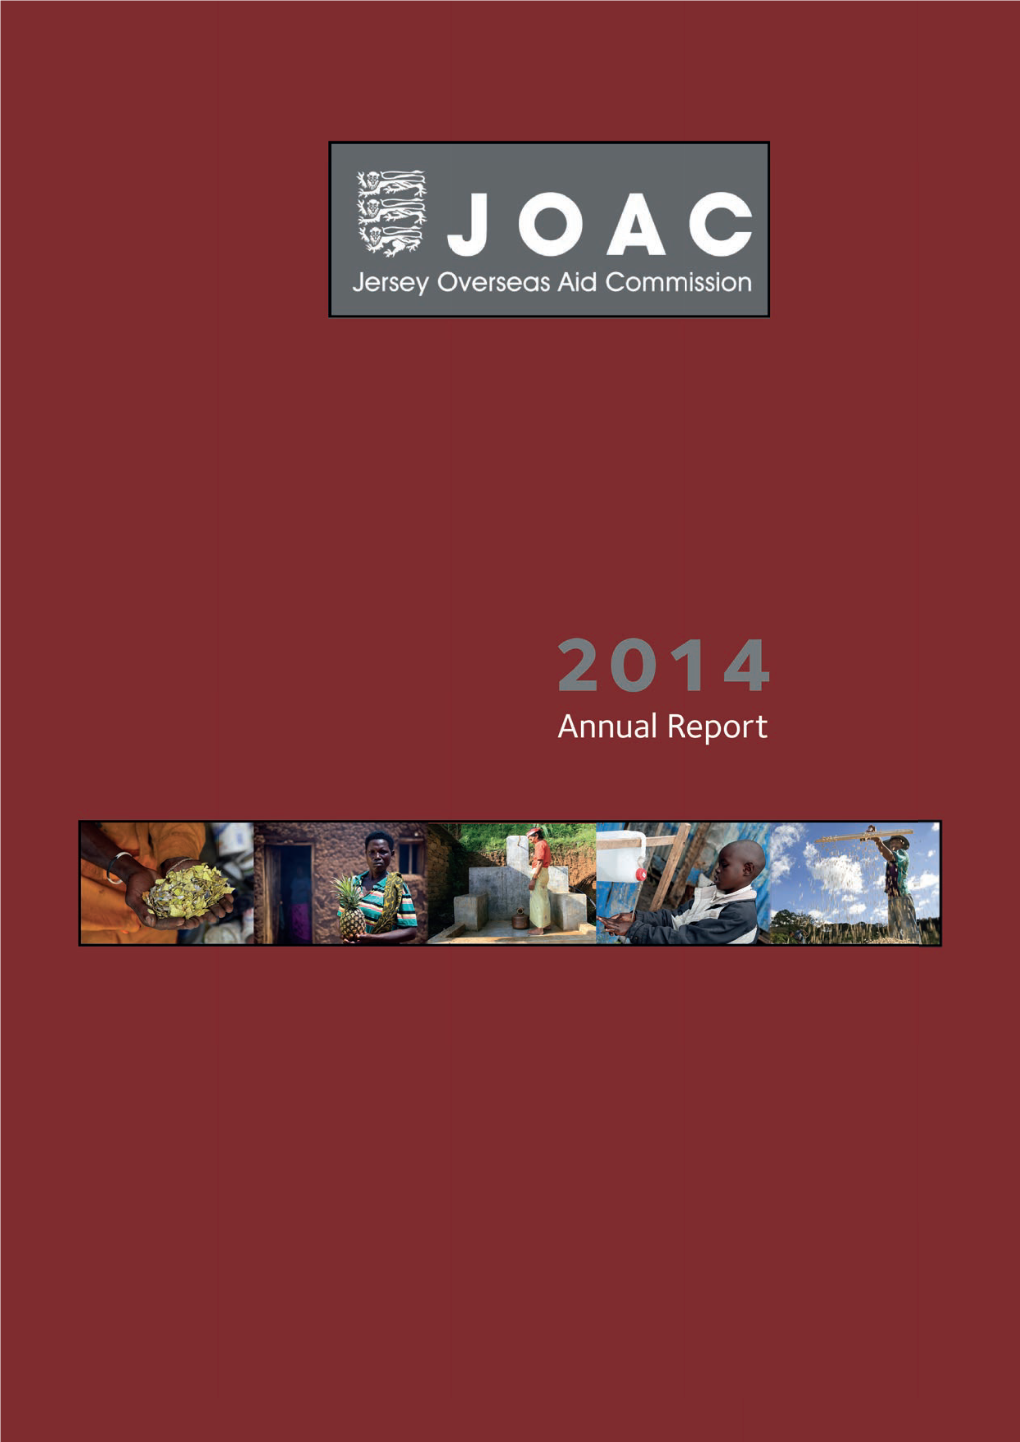 JOAC Annual Report Final.Indd